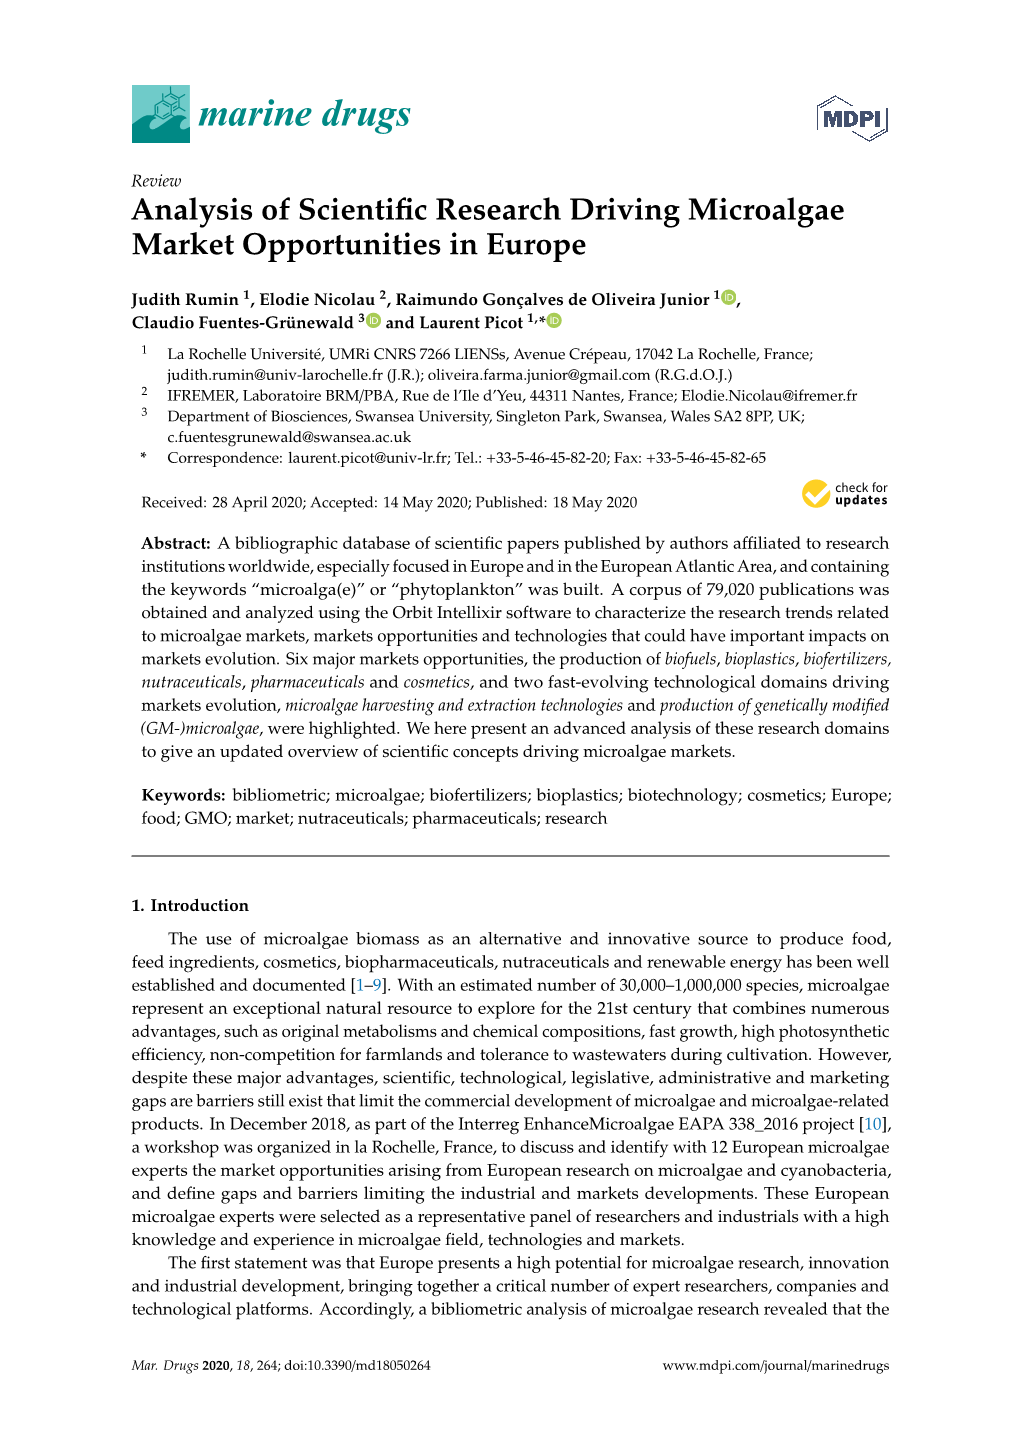 Analysis of Scientific Research Driving Microalgae Market Opportunities In